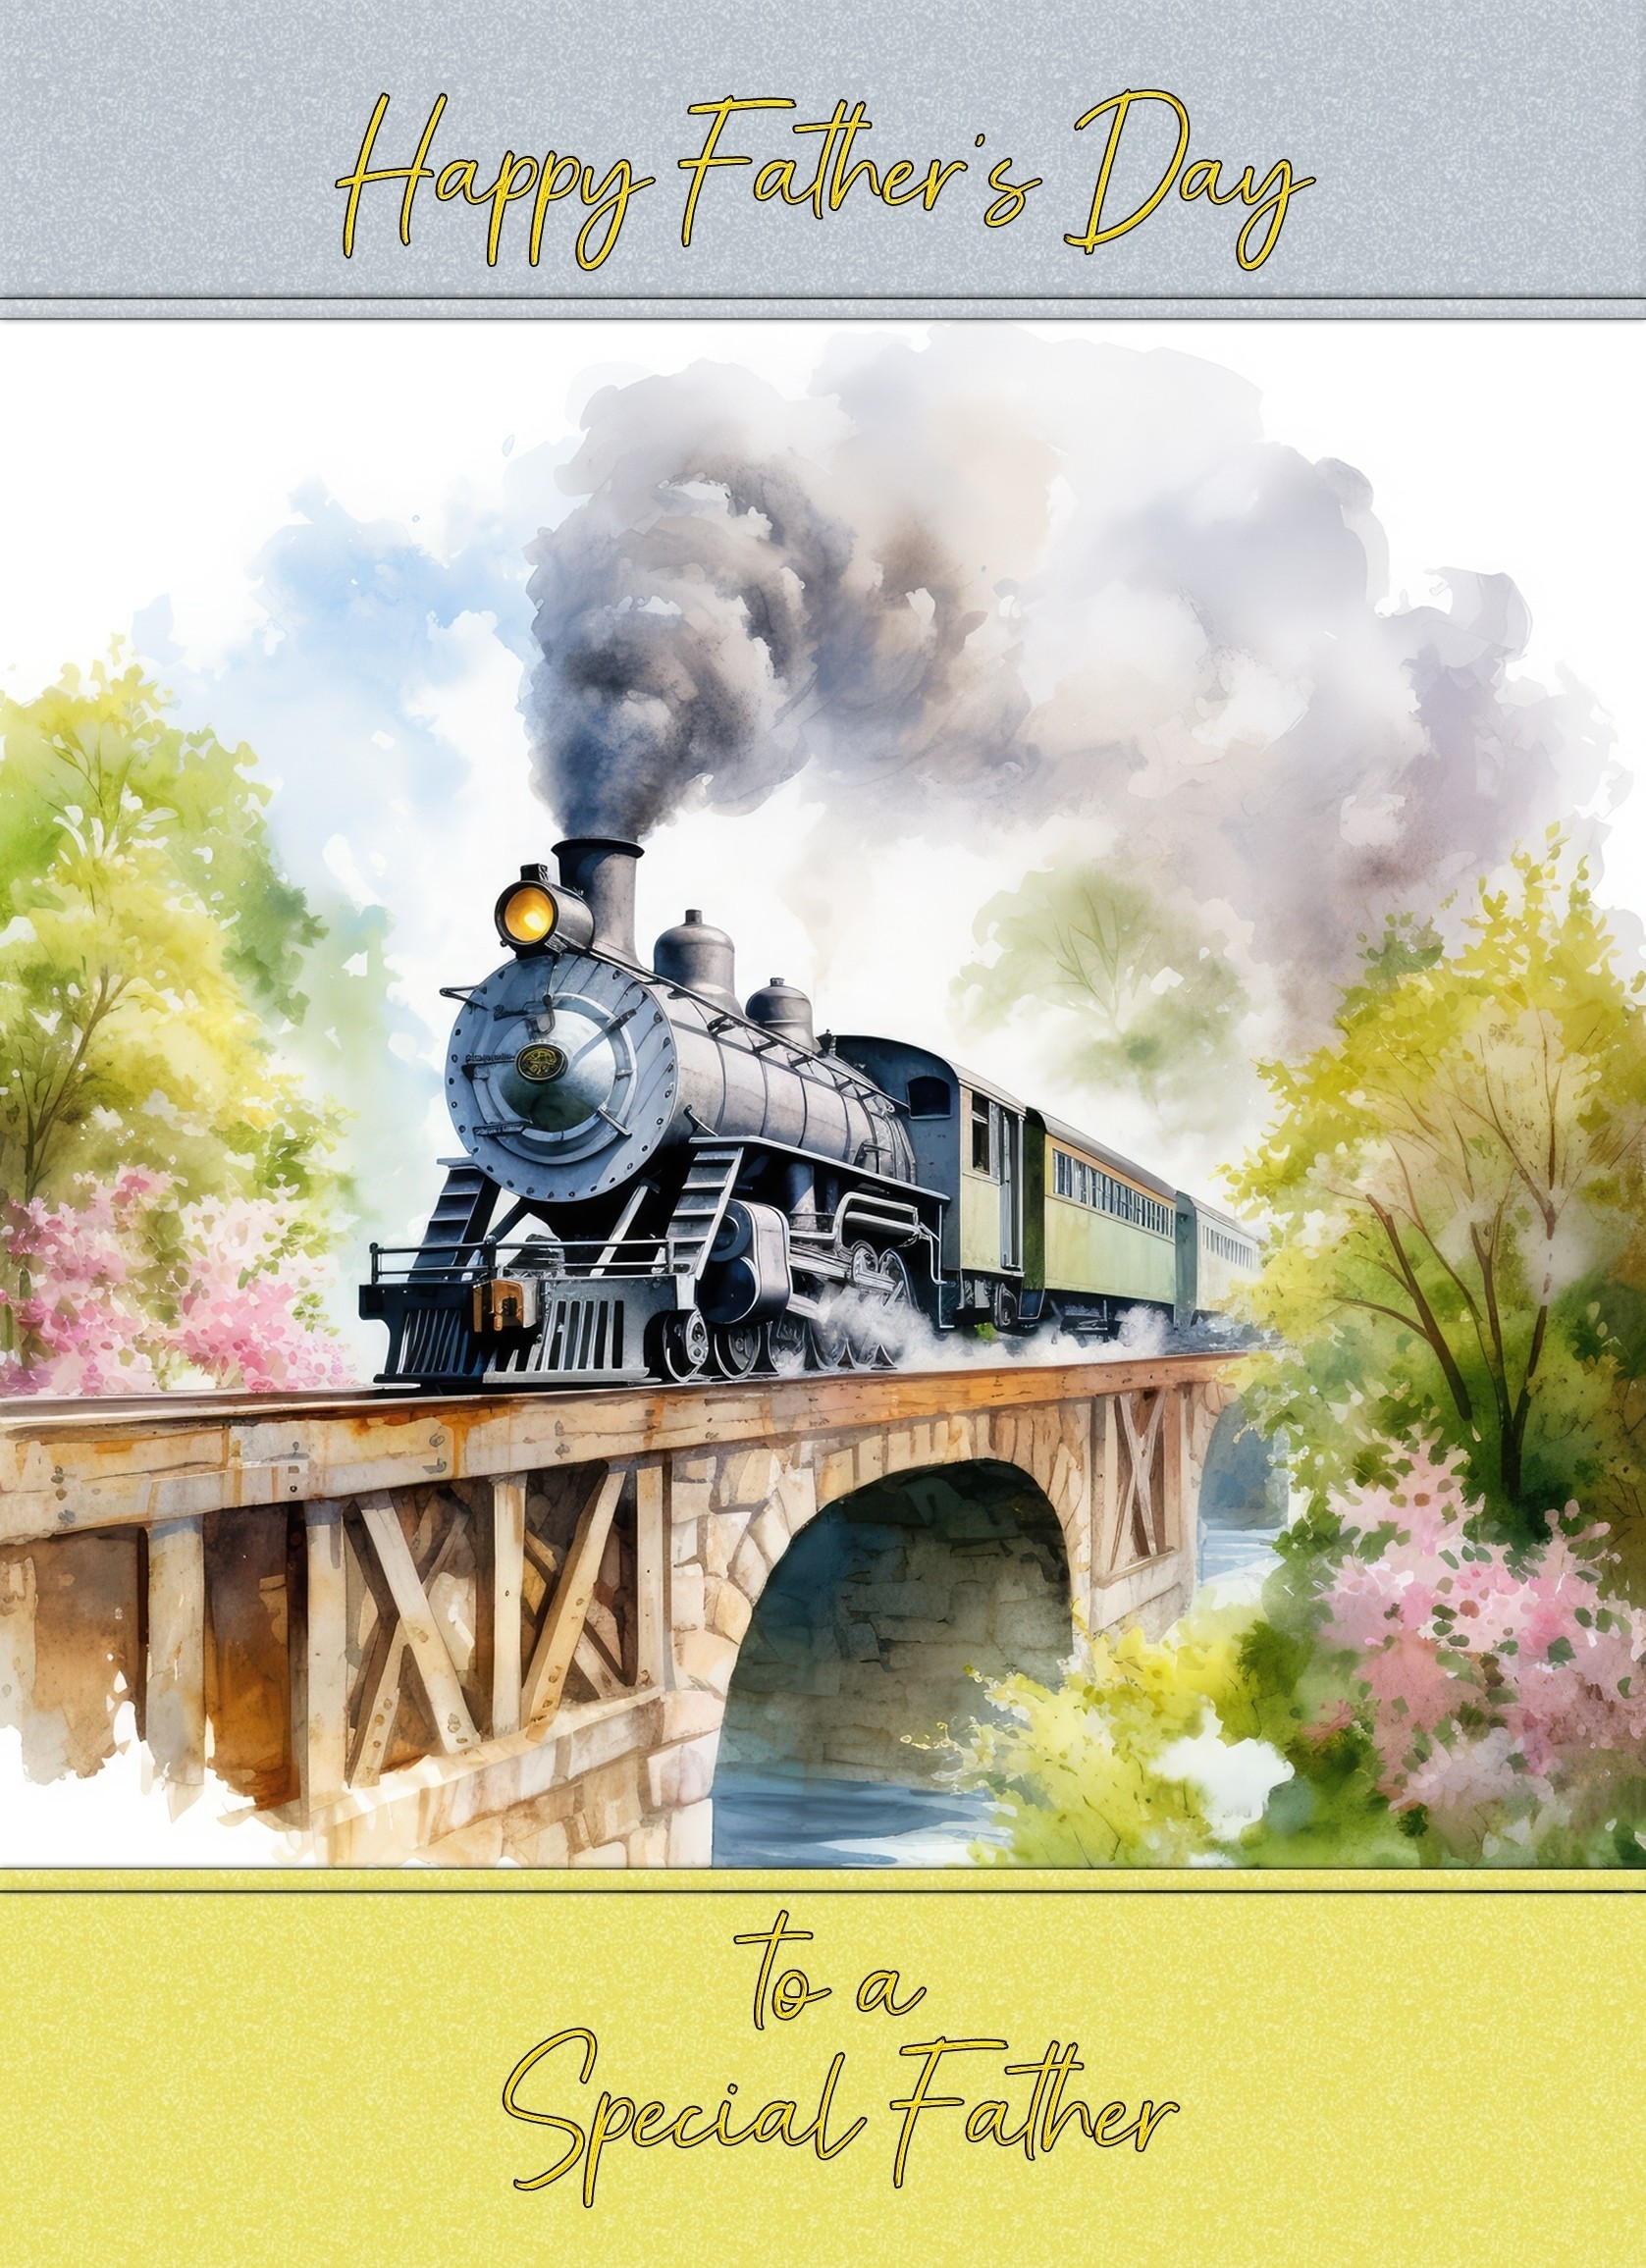 Steam Train Vintage Art Square Fathers Day Card For Father (Design 4)